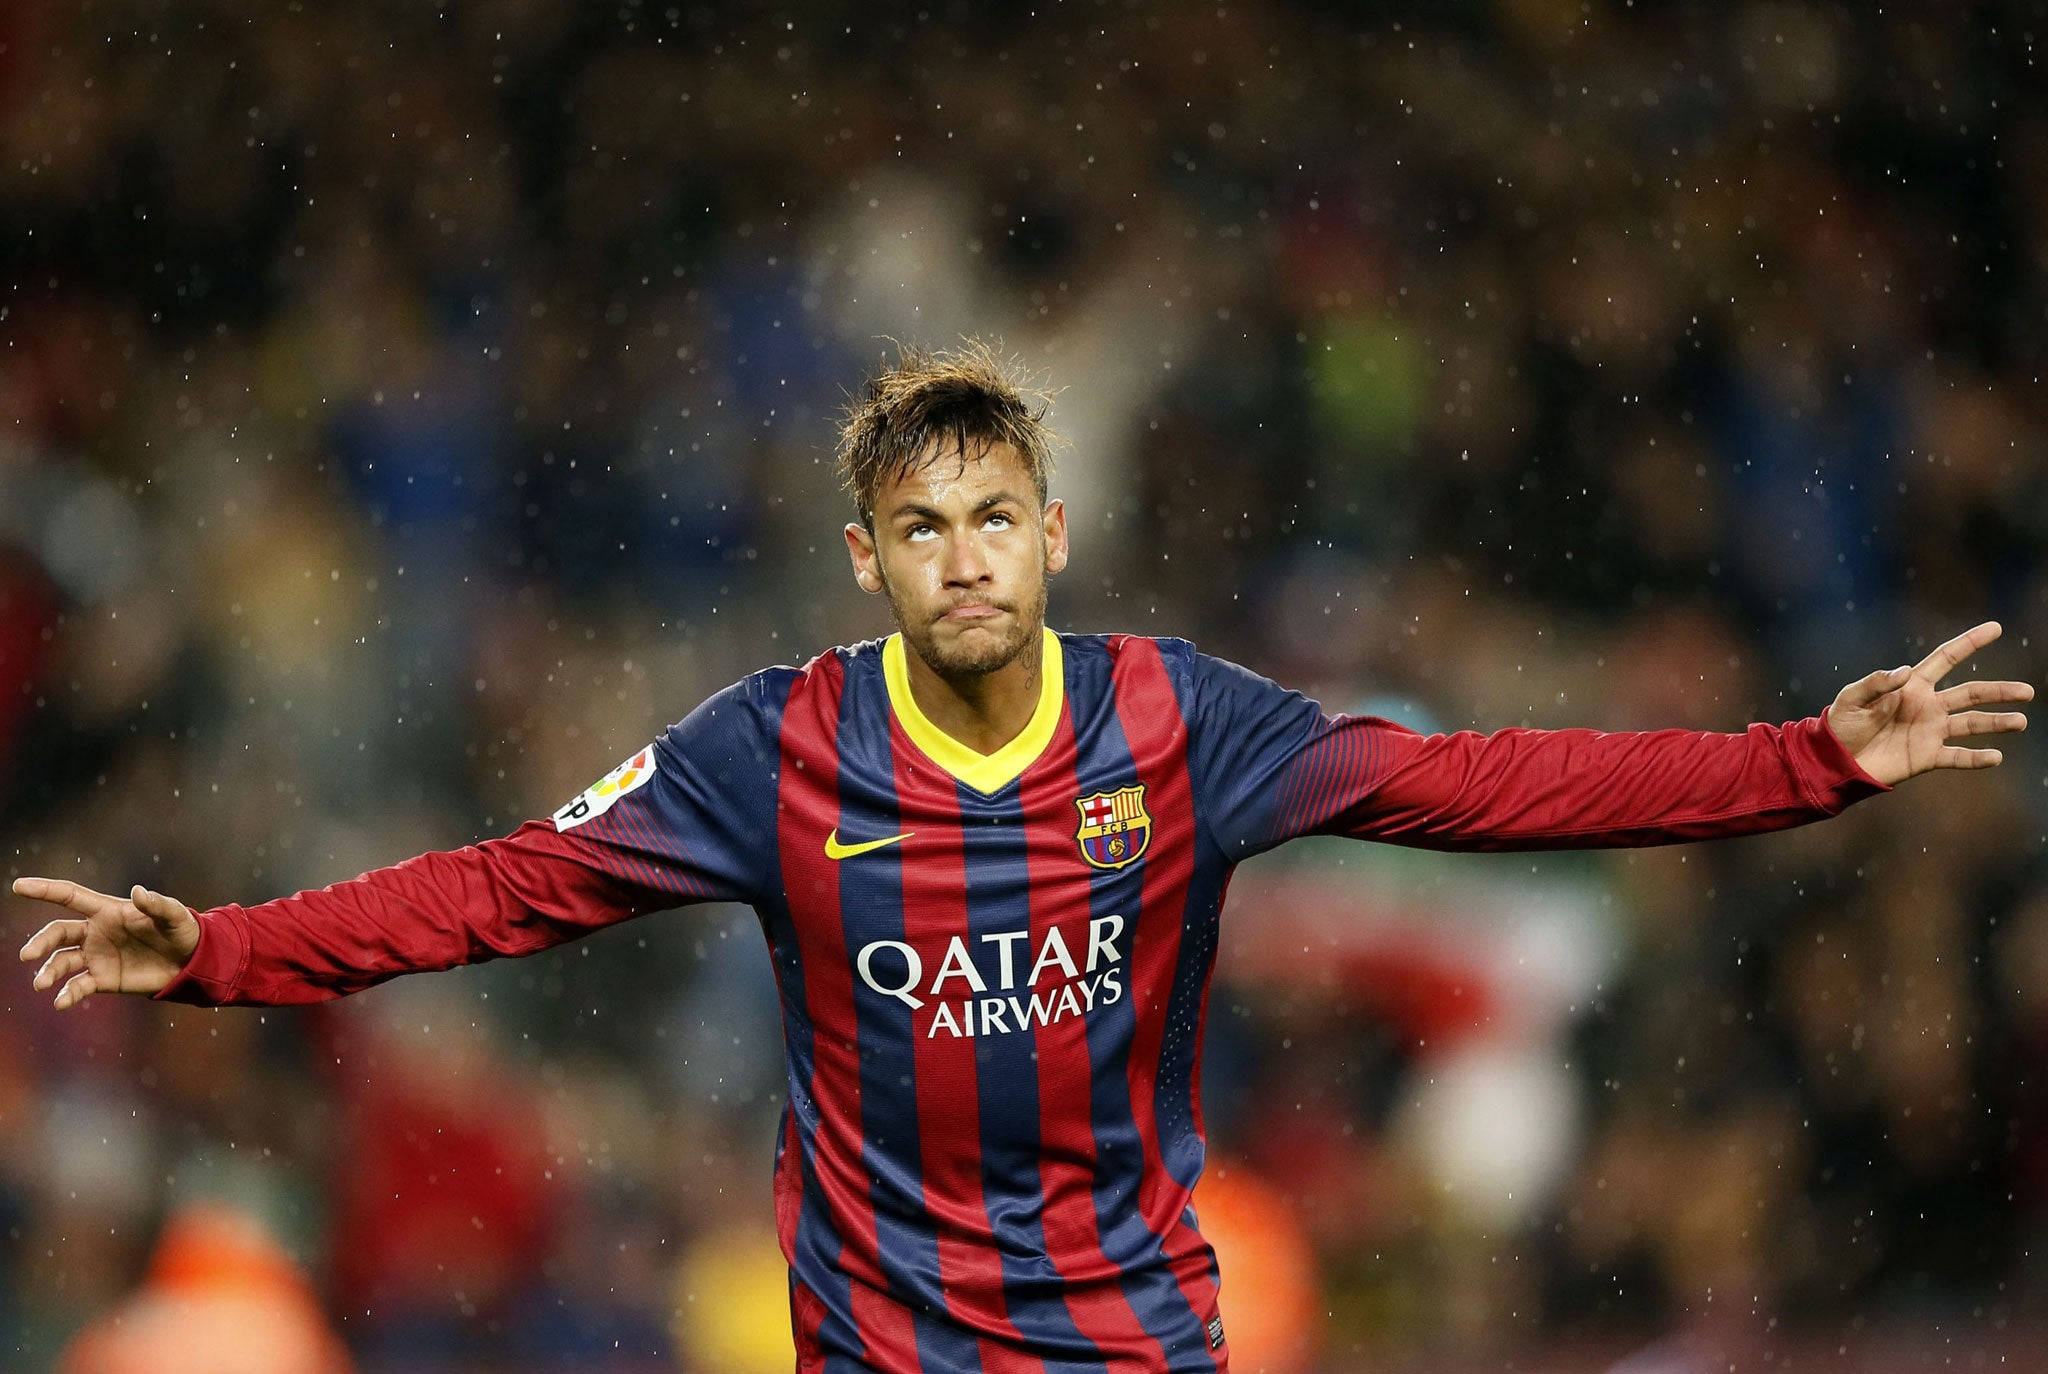 Barcelona's Neymar could be making a song with One Direction